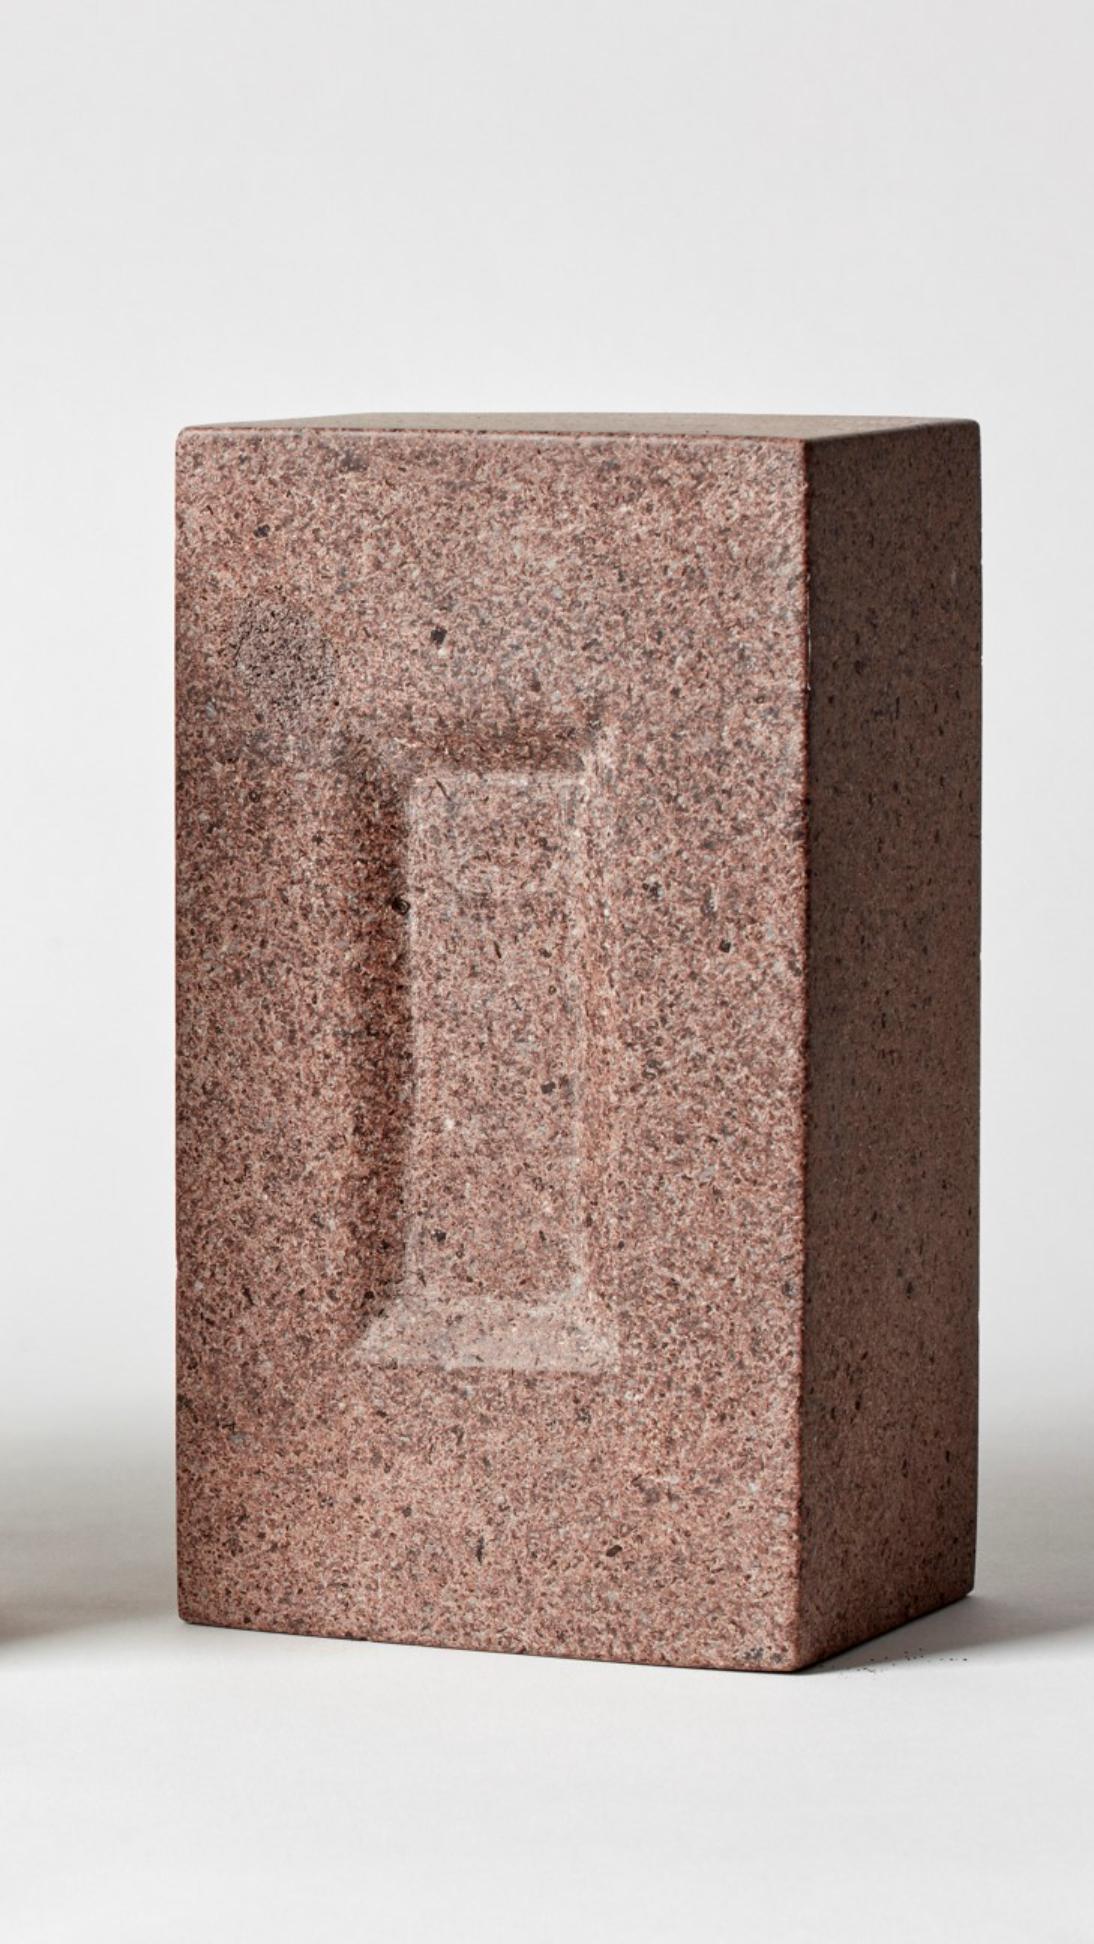 Brick by Estudio Rafael Freyre.
Dimensions: W 12.5 D 9 x H 23 cm. 
Materials: andes stones.
Also available: other finishes available.

The brick is a generic constructive element that constitutes part of the urban imaginary. In Peru, moreover,